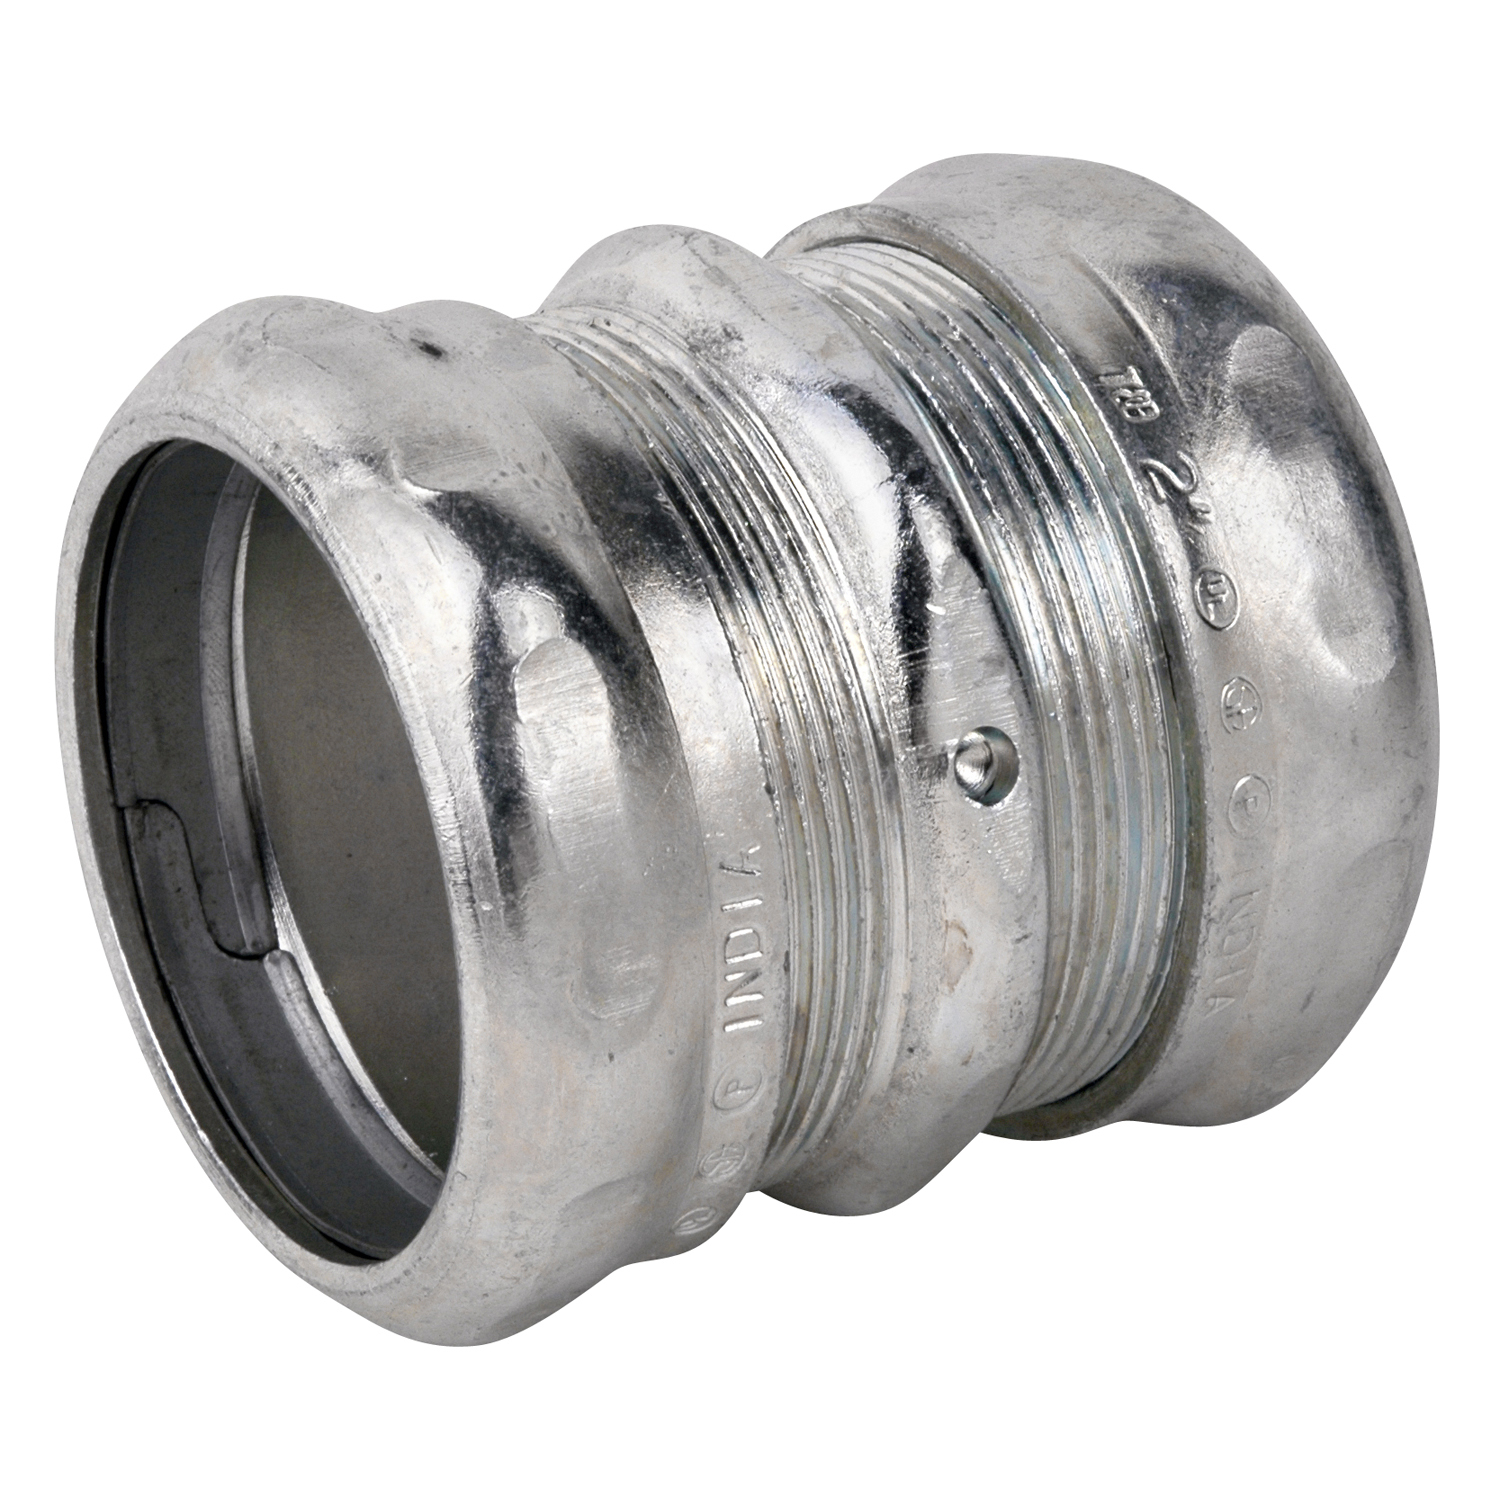 Thomas & Betts TK116A Steel City Compression Coupling